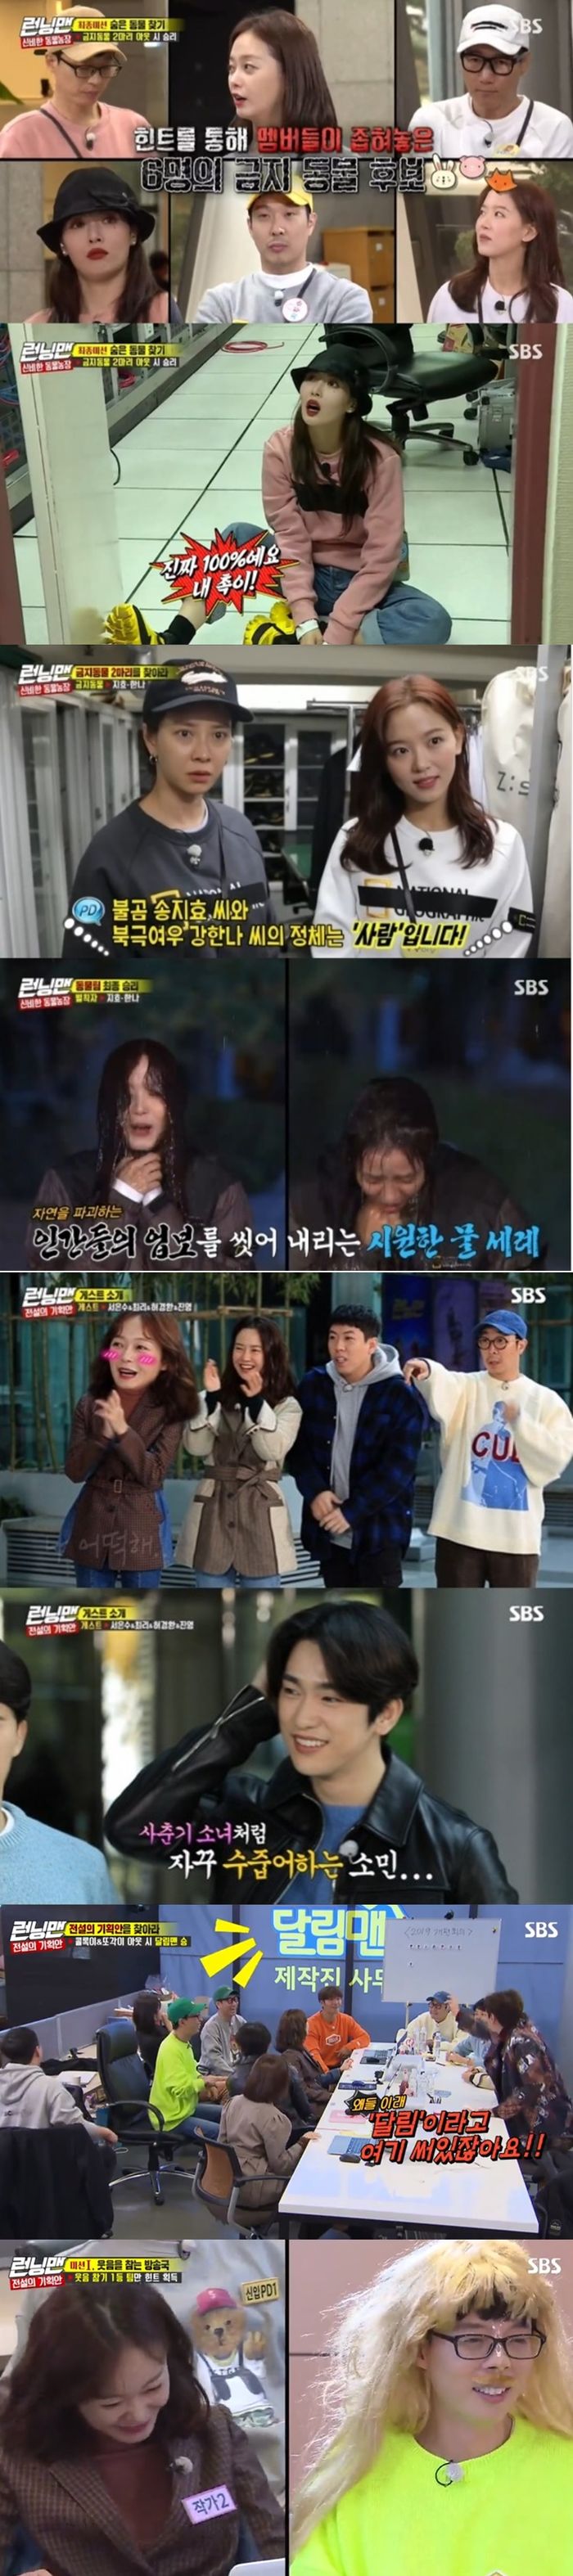 SBS Running Man jumped to 10% of Per minute top TV viewer ratings and showed TV viewer ratings for 6 consecutive weeks.According to Nielsen Korea, a TV viewer rating company, SBS Running Man, which was broadcast on the 17th, showed an increase in TV viewer ratings for the sixth consecutive week with an average TV viewer rating of 5.4% (based on the metropolitan area) and 8.3% in the second part.2049 Target TV viewer ratings, an important indicator of advertising officials, rose by 1% p from last week to 4.8% (2 parts), surpassing all competition programs such as MBC Masked Wang and KBS Per minute The best TV viewer ratings shot a whopping 10 percent.On this day, the broadcast was decorated with the final race of Mysterious Animal Farm, and the members started to search for prohibited animals.If you find a forbidden animal and in-N-Out Burger, the general animal wins, but the forbidden animal was able to use the closed area.When an In-N-Out Burgered animal is created by a prohibited animal, a closed area is created and all hints in the closed area disappear, and even if the animal is inside it, the In-N-Out Burger is made.Yoo Jae-Suks performance shone in the face of everyone questioning each other.Yoo Jae-Suk found out that the forbidden animals were people, and he noticed that Kang Han-Na and Song Ji-hyo were sisters and bears who became foxes respectively.Meanwhile, Kang Han-Na, Song Ji-hyo, in-N-Out Burger Hyun-ah and Everglow Shihyeon and targeted Yoo Jae-Suk.Yoo Jae-Suk informed members of the identity of the banned animals in an urgent situation and eventually the banned animals Kang Han-Na and Song Ji-hyo were in-N-Out Burger and received the final penalty.Then, the Legendary Plan Race was held, where God Seven Jinyoung, actor Seo Eun-soo, Choi Ri, and comedian Hur Kyung-hwan were invited as guests.Jeon So-min welcomed Jinyoung with a thrill, but he gave a big smile with an unexpected sweat.Since then, the members have been divided into PD, writer, and new PD team of Ralim Man program and started to search for Kolok Lee and Daegak which is reported as a ghost story of broadcasting company.The first mission was to find a laugh—to put up with laughter under any circumstances, and to perform a dressing penalty if you laughed.In the midst of a fierce laughter confrontation, a questionable tool uncle appeared in front of the members.Everyone was nervous about the powerful laugh alarm energy, and this scene took the best minute with 10% of Per minute top TV viewer ratings.Running Man, which will be released by Kolock and the other, will be broadcasted at 5 pm on the 24th.